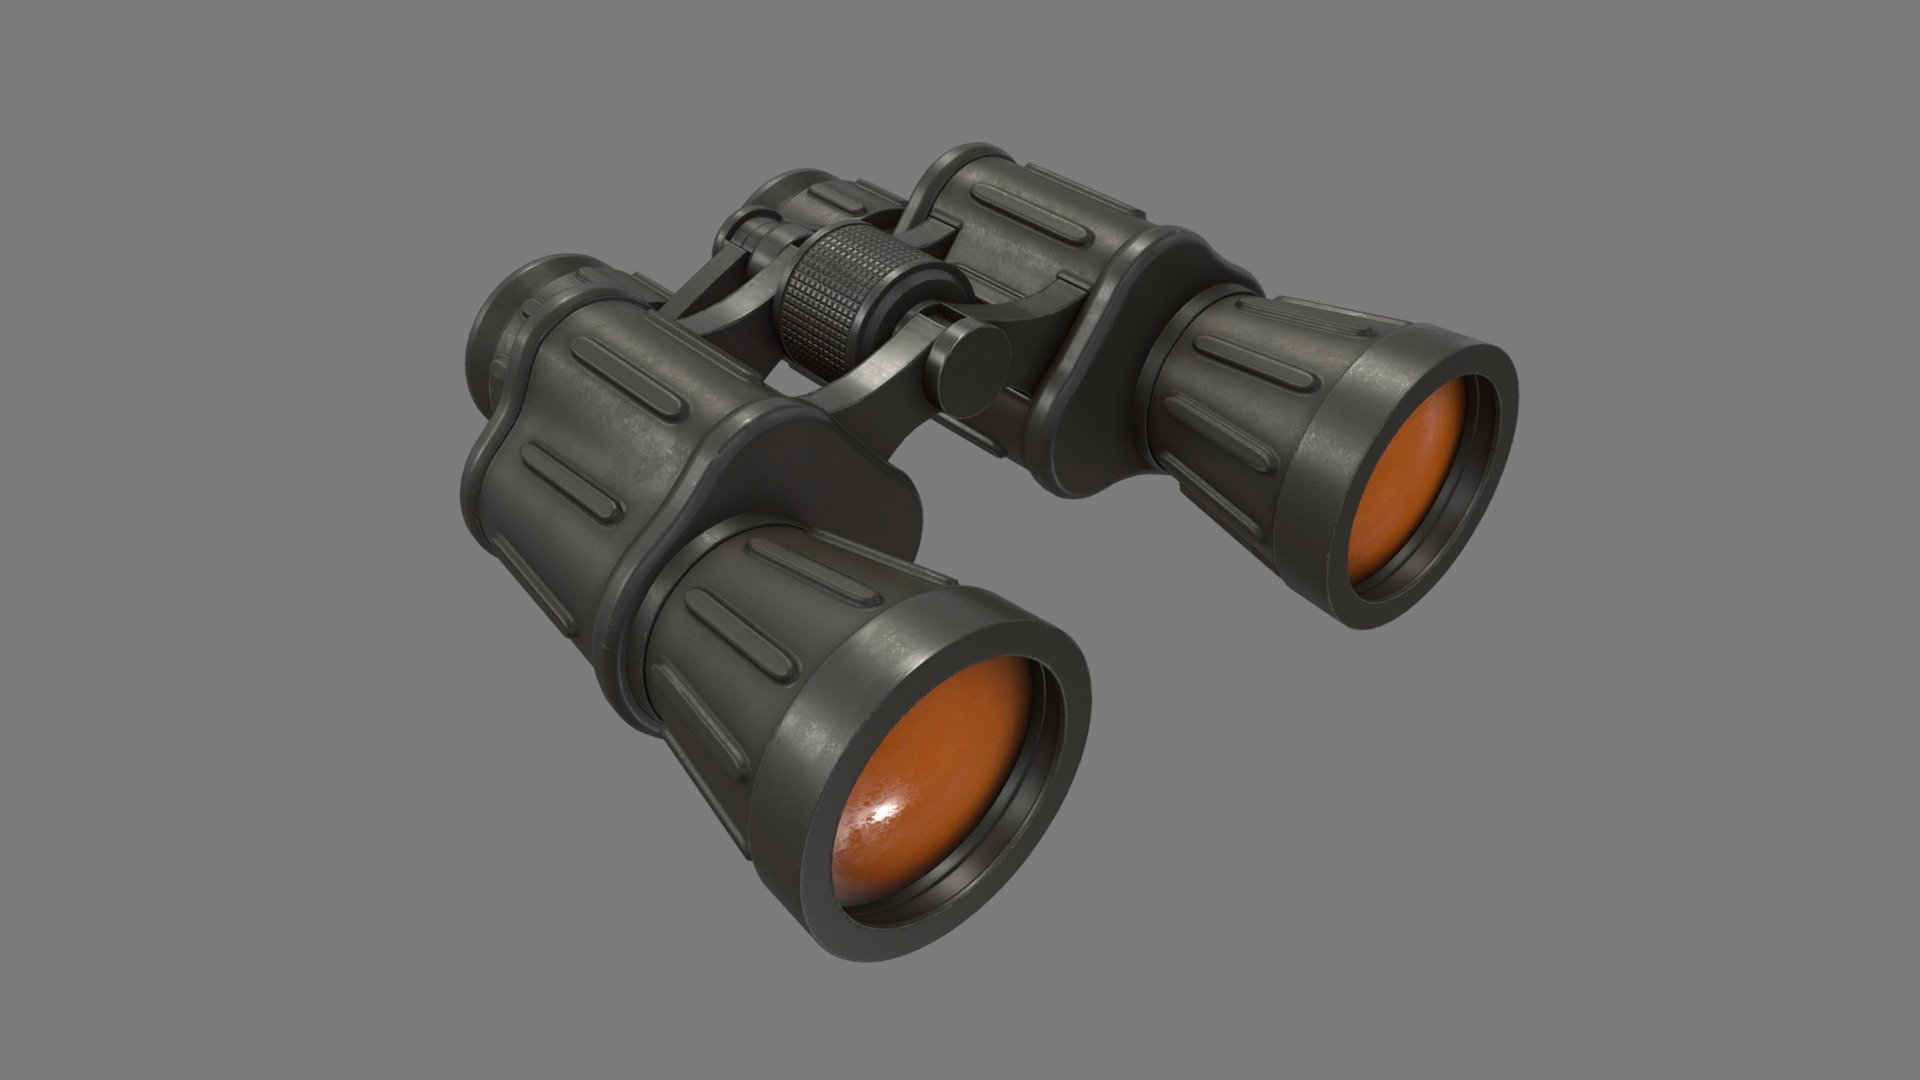 Fourth assisgnment in the Game Asset Pipeline course, 2DAE.

Reference from a pair of Humvee 10x50 field binoculars 3d model